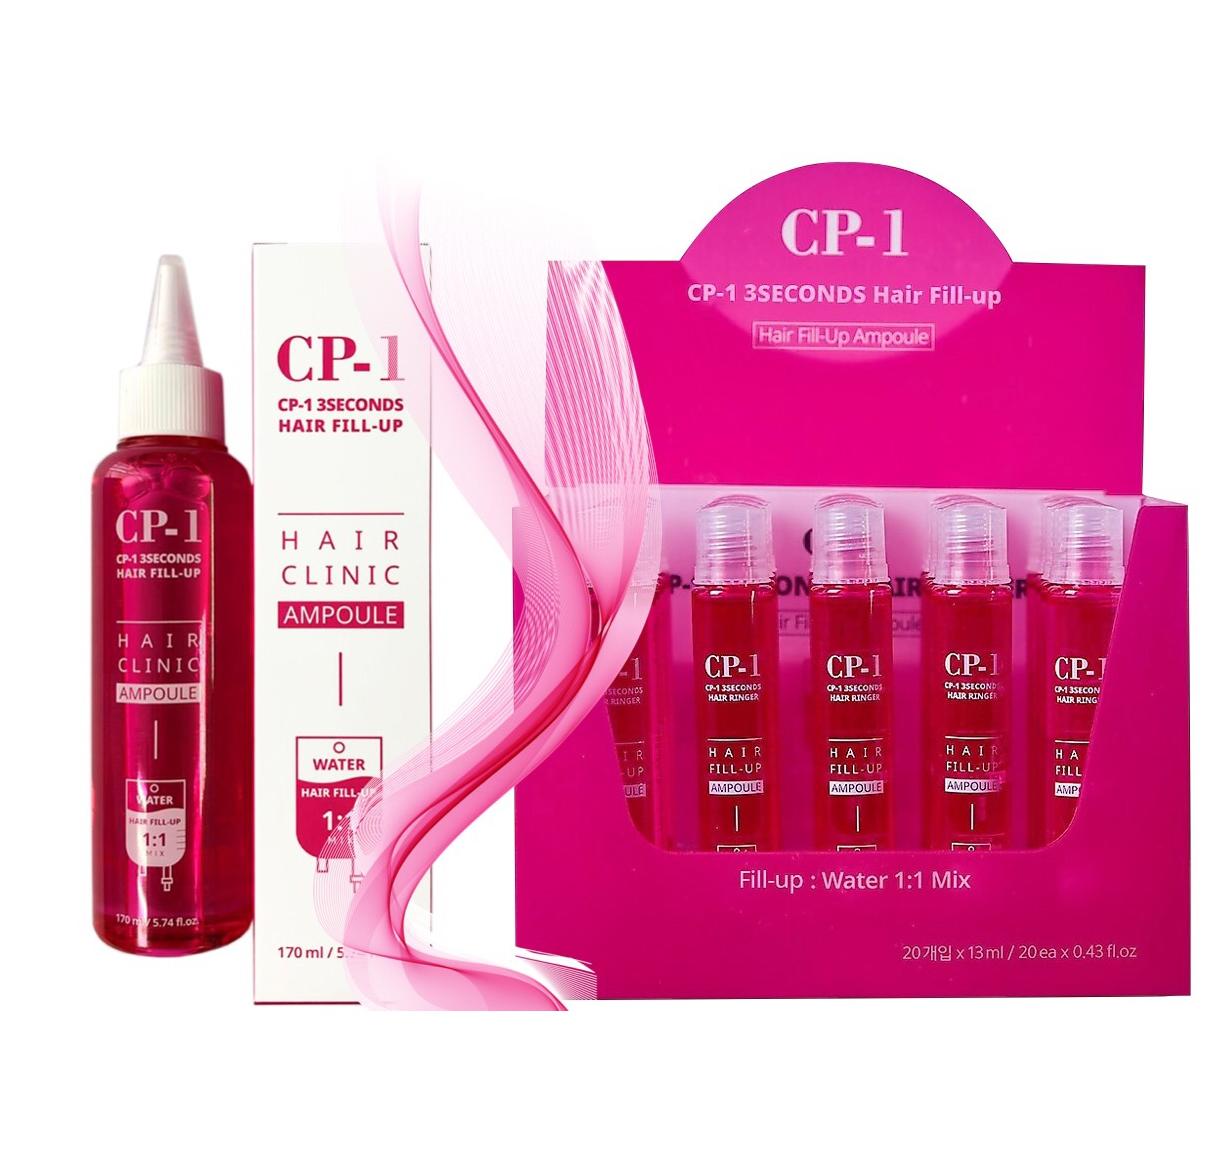 Филлер для волос Esthetic house CP-1 3 seconds hair runger fill-up ampoule